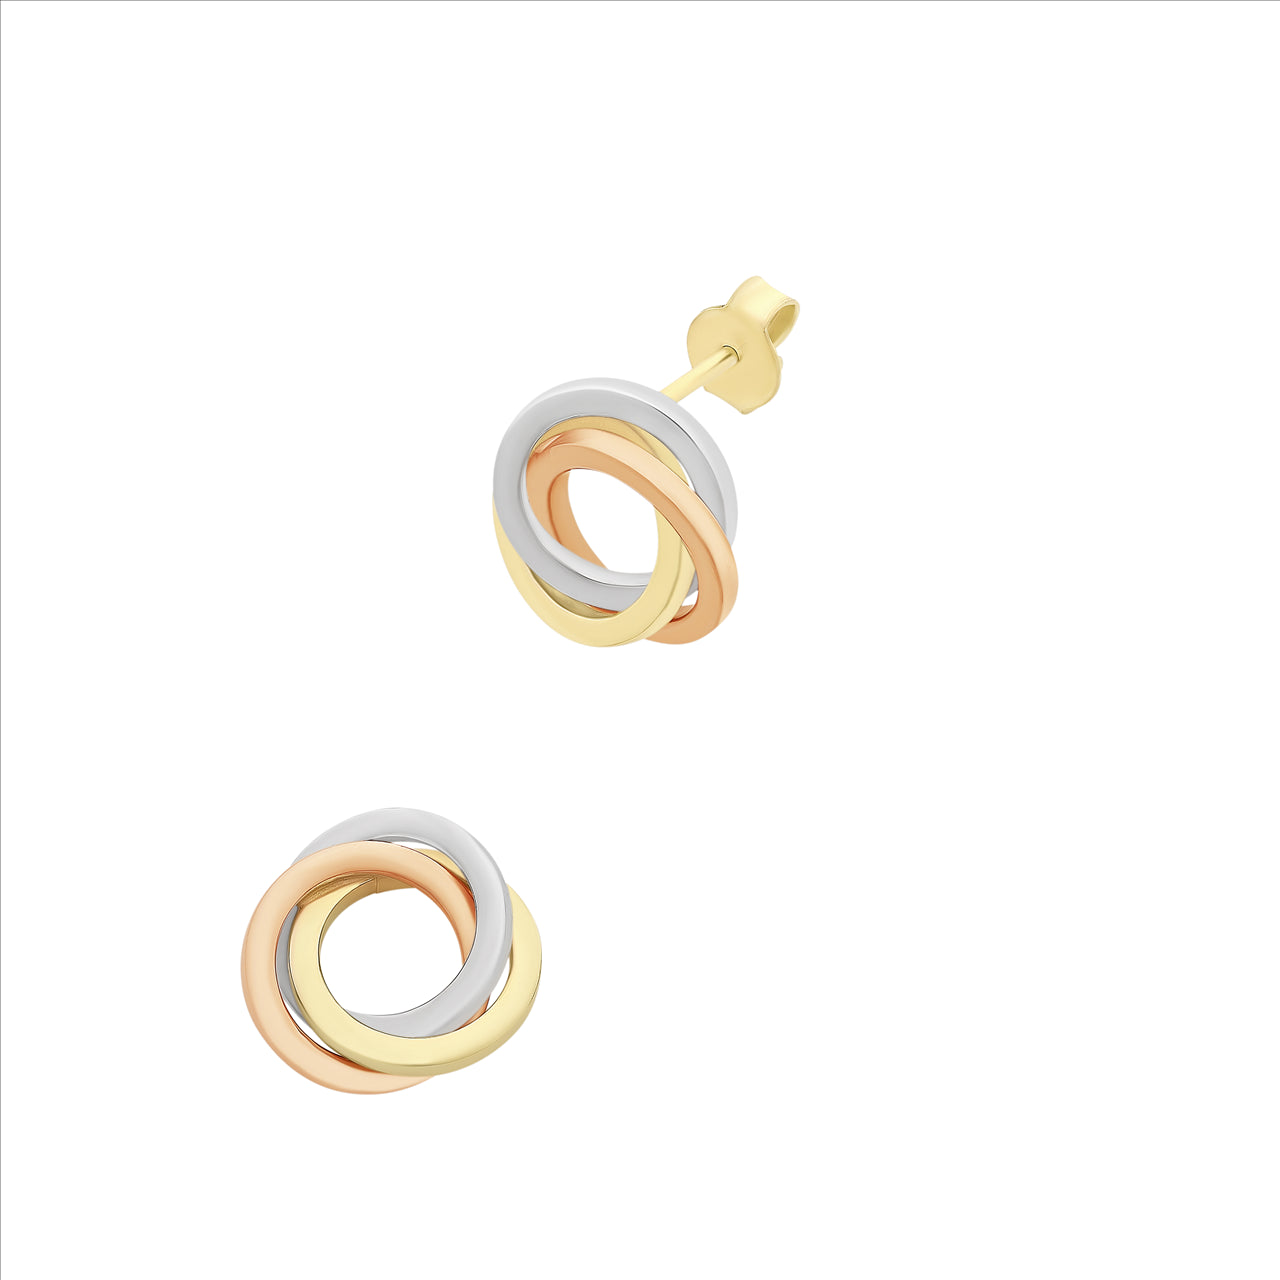 9Ct Gold Silver Filled Swirl Circle 3 Tone Stud Earrings